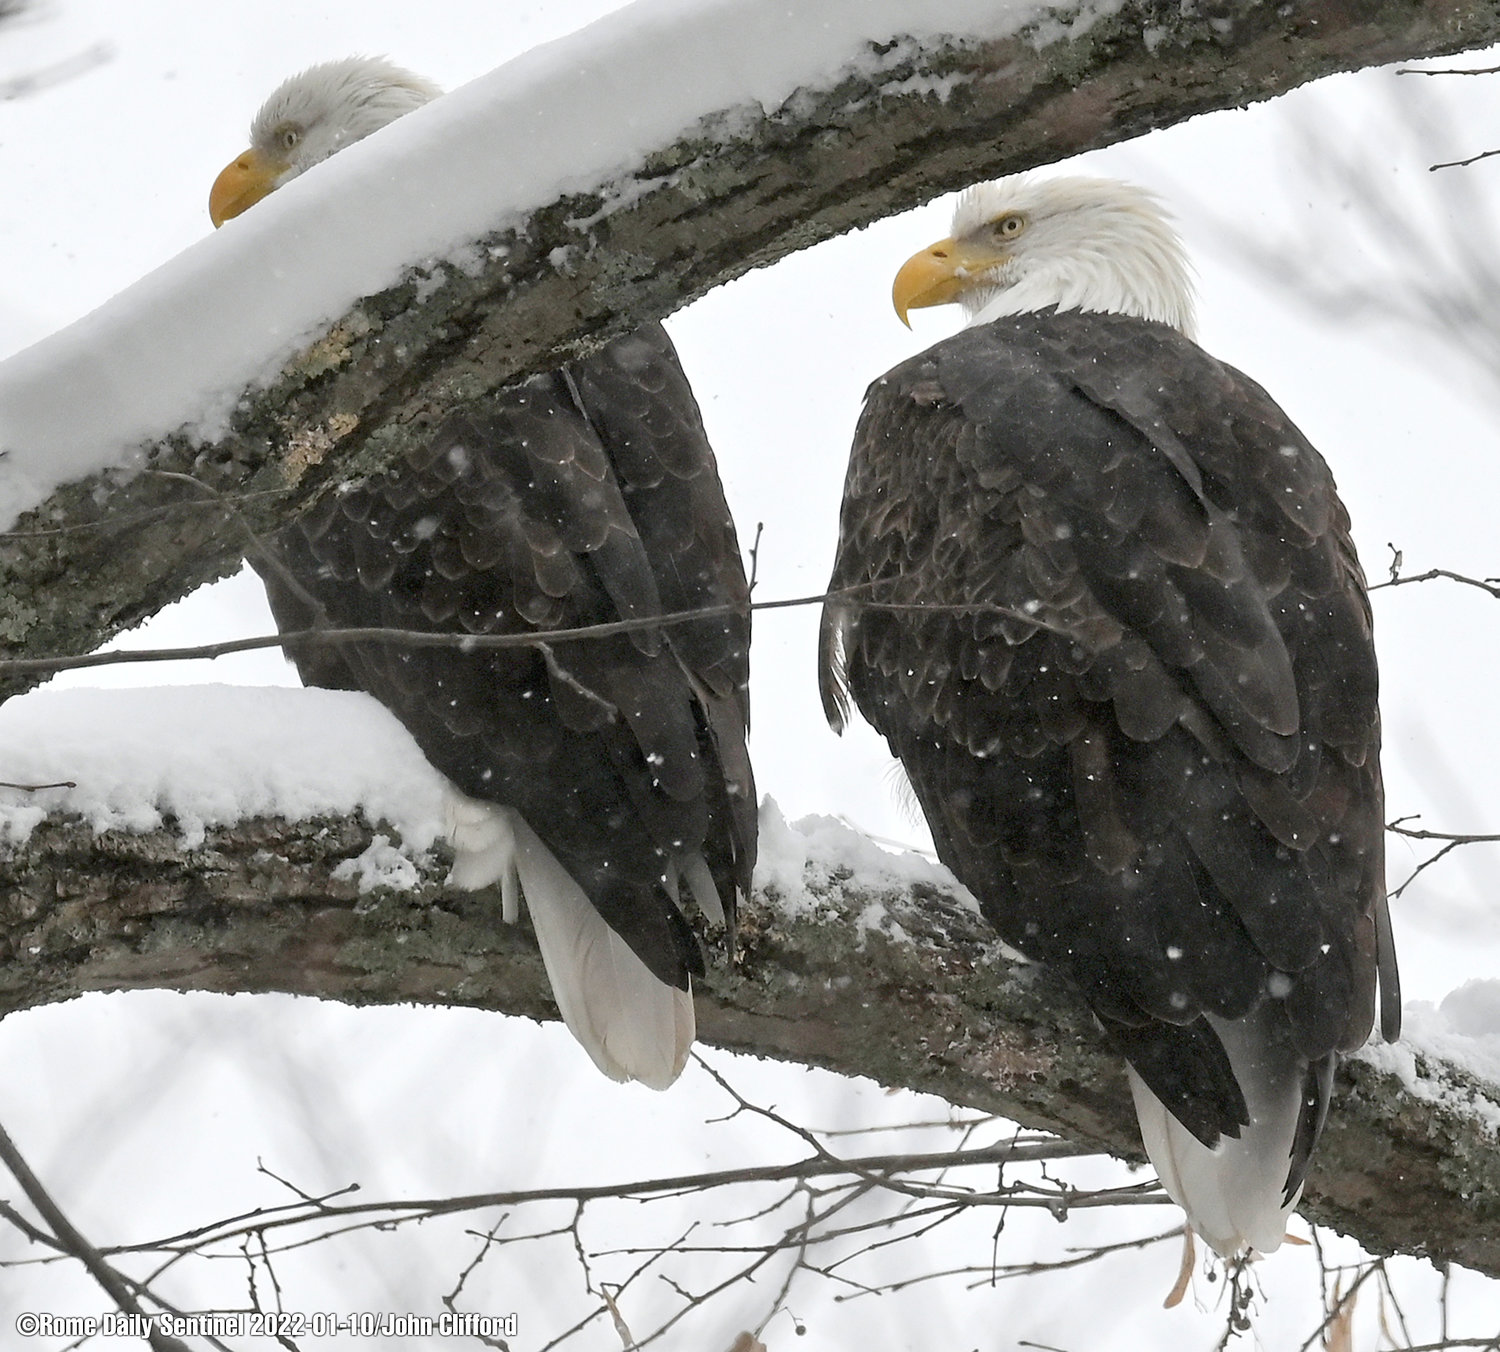 A pair of adult American Bald Eagles braving the snow storm together.